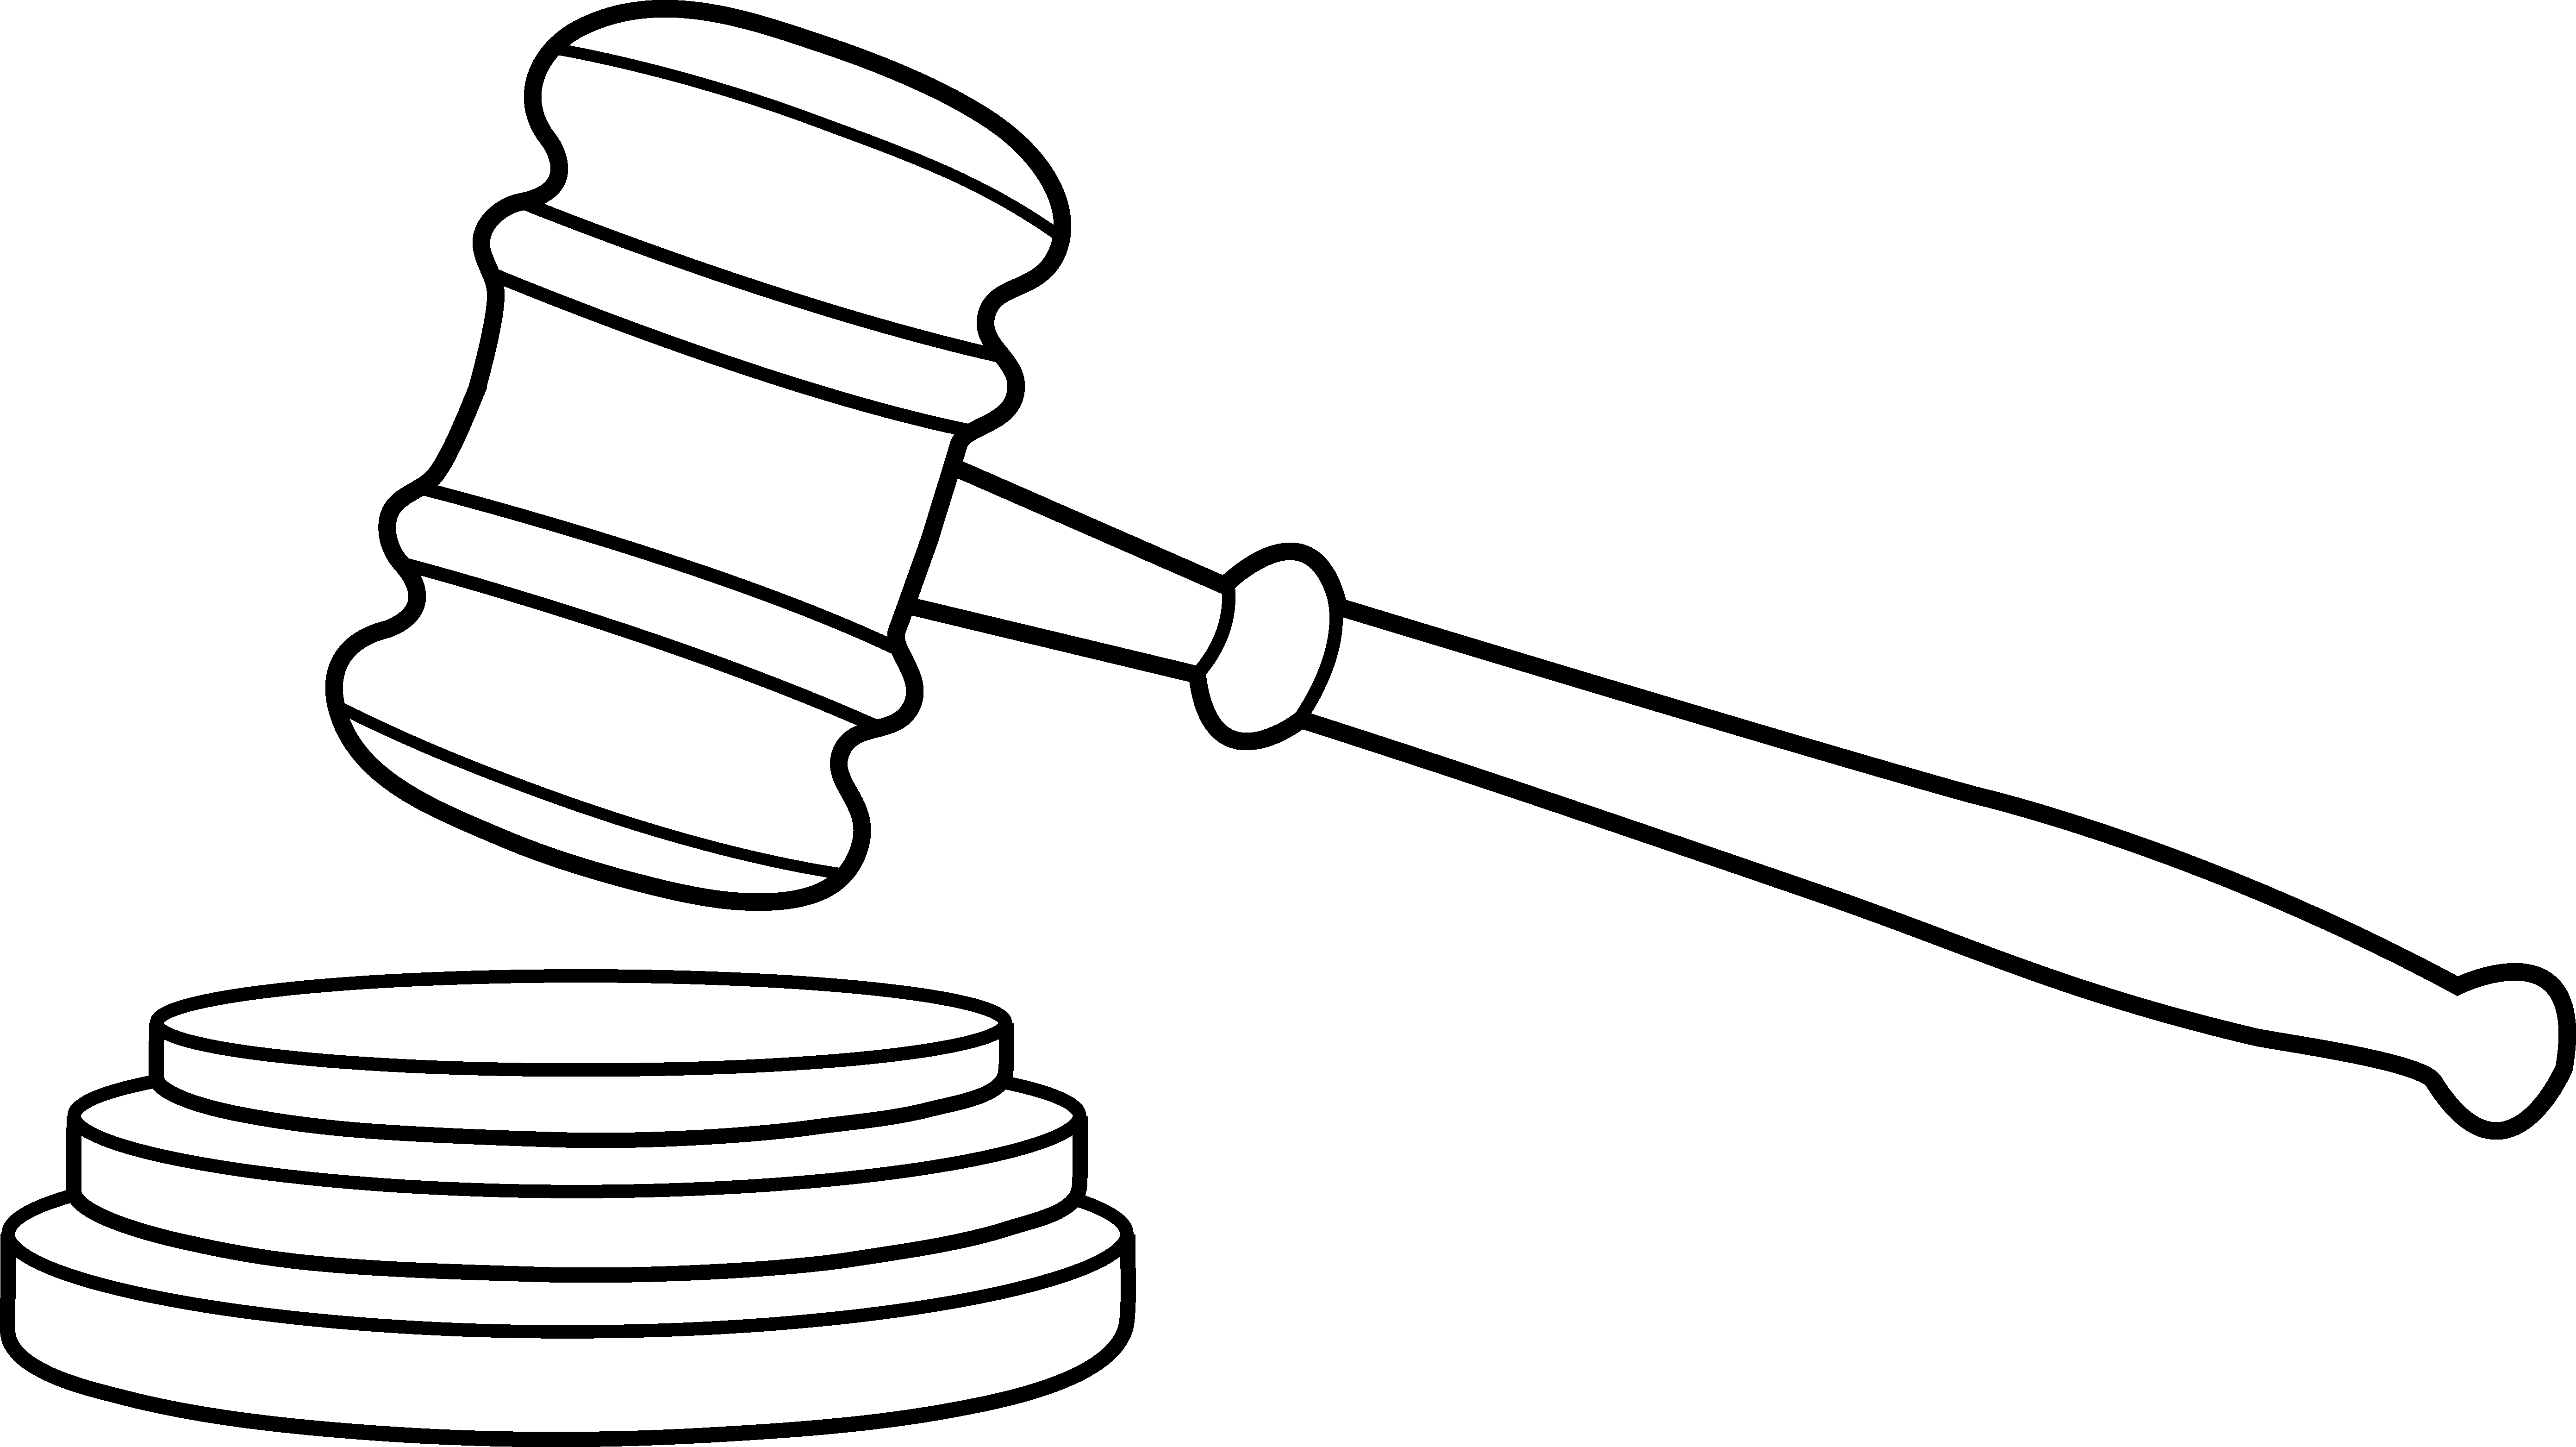  collection of court. Judge clipart appeal